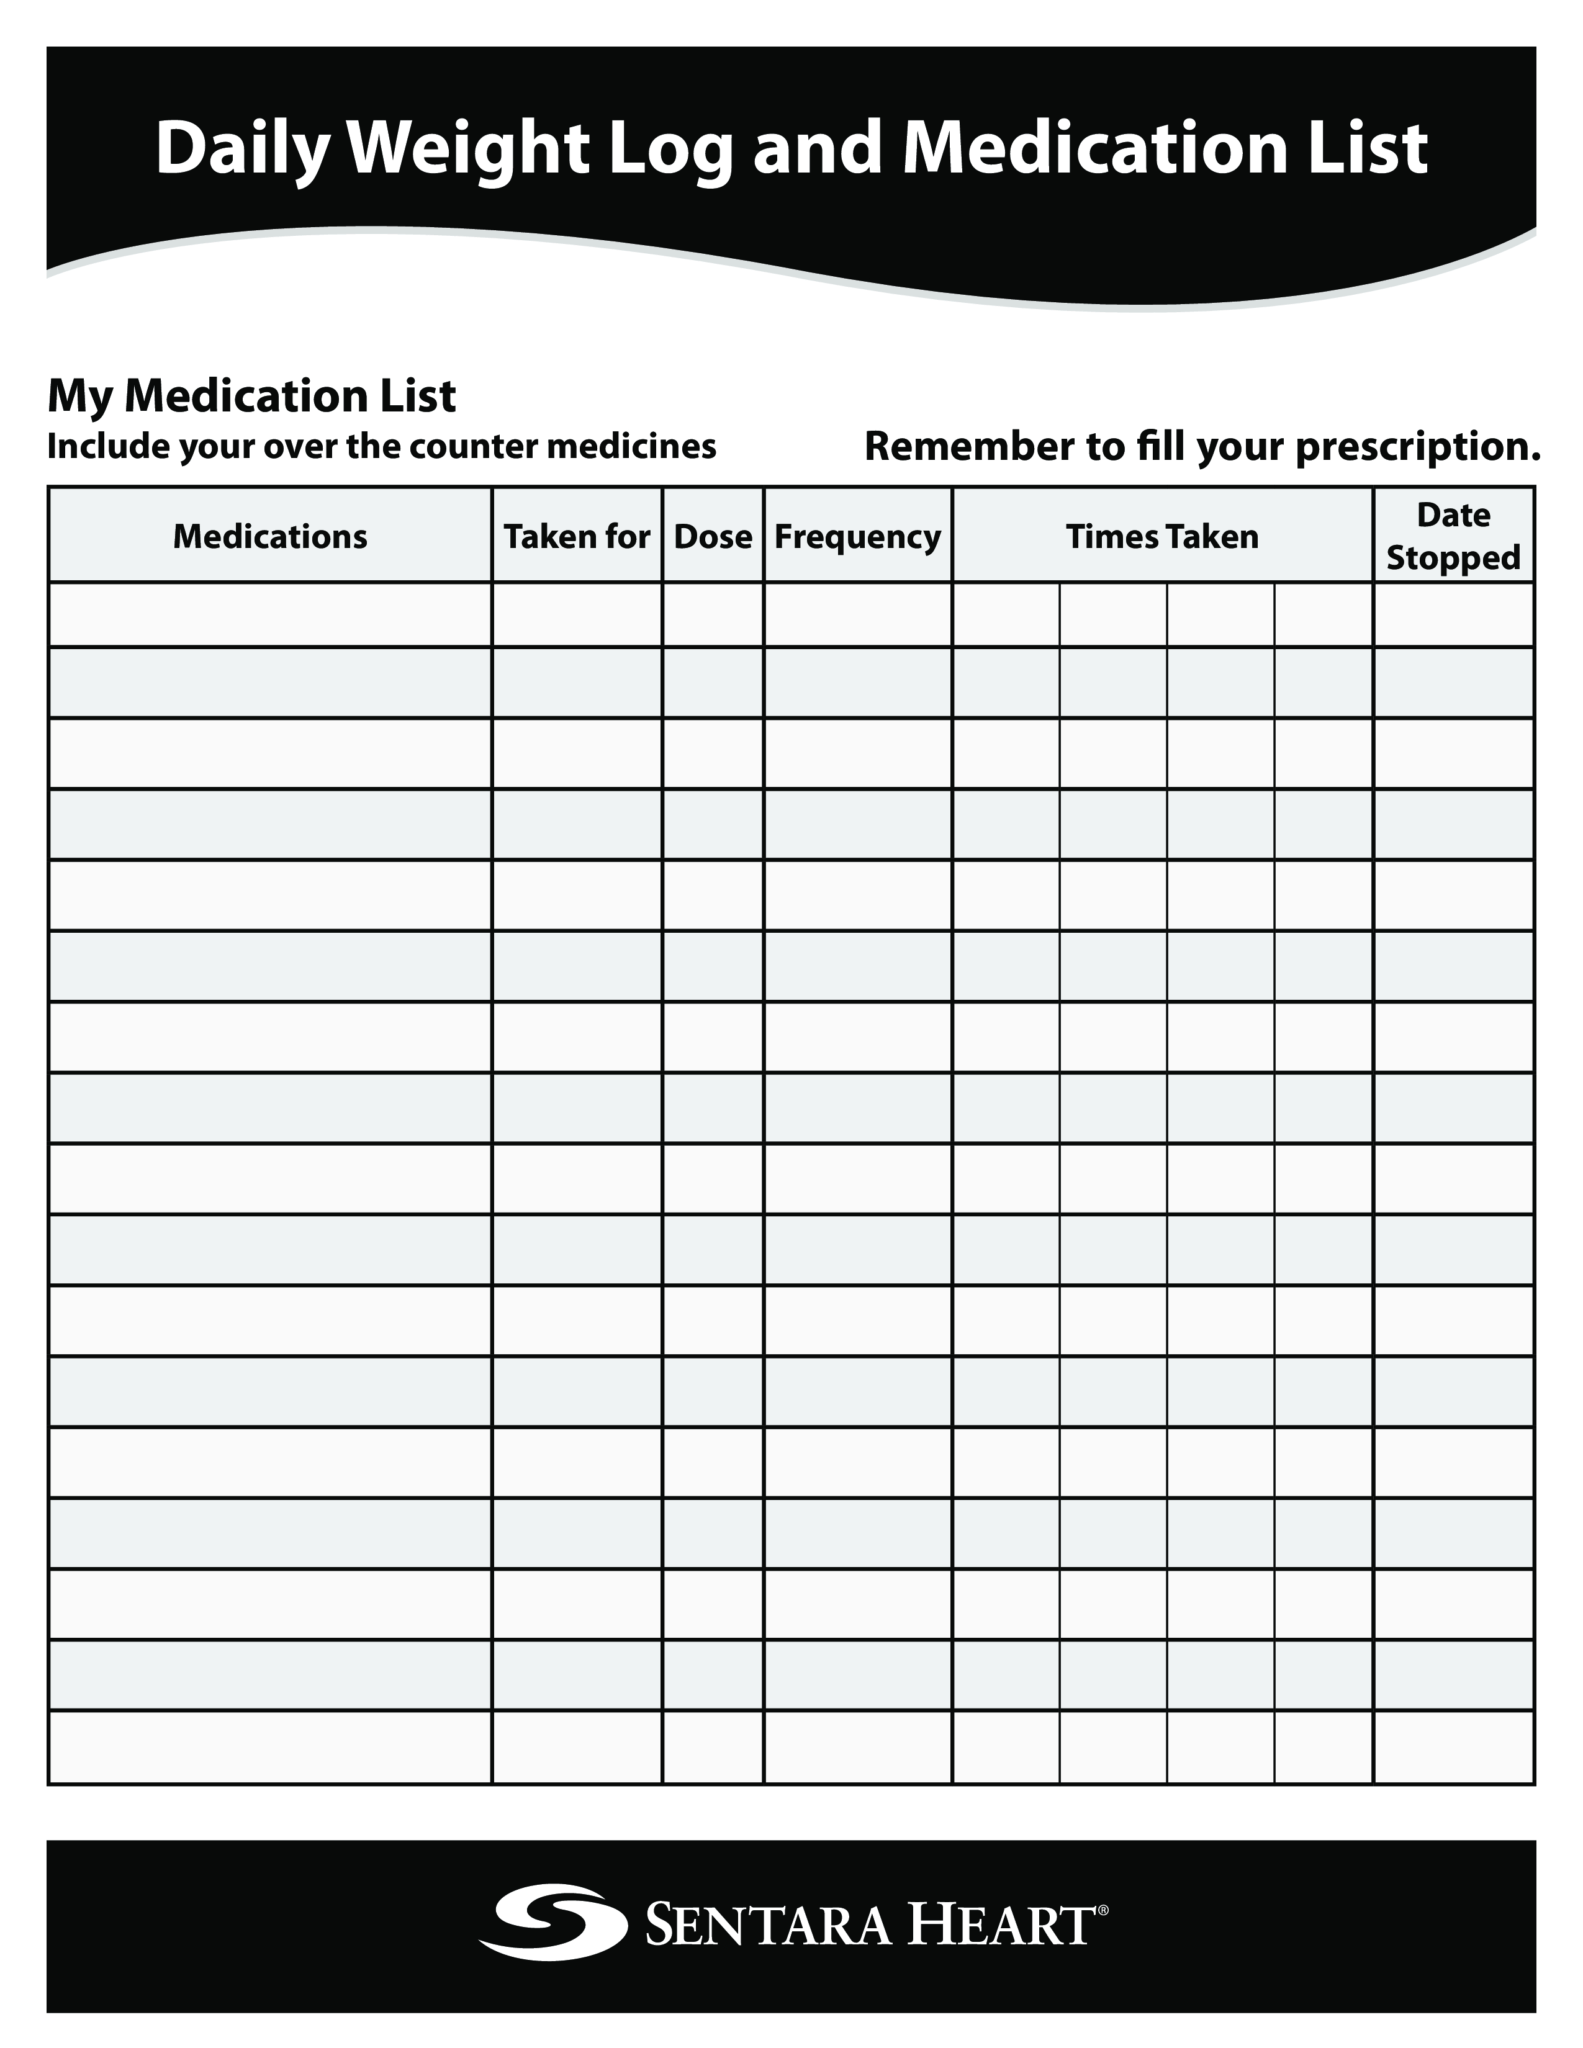 daily-medication-log-sheet-download-excel-templates-excel-templates